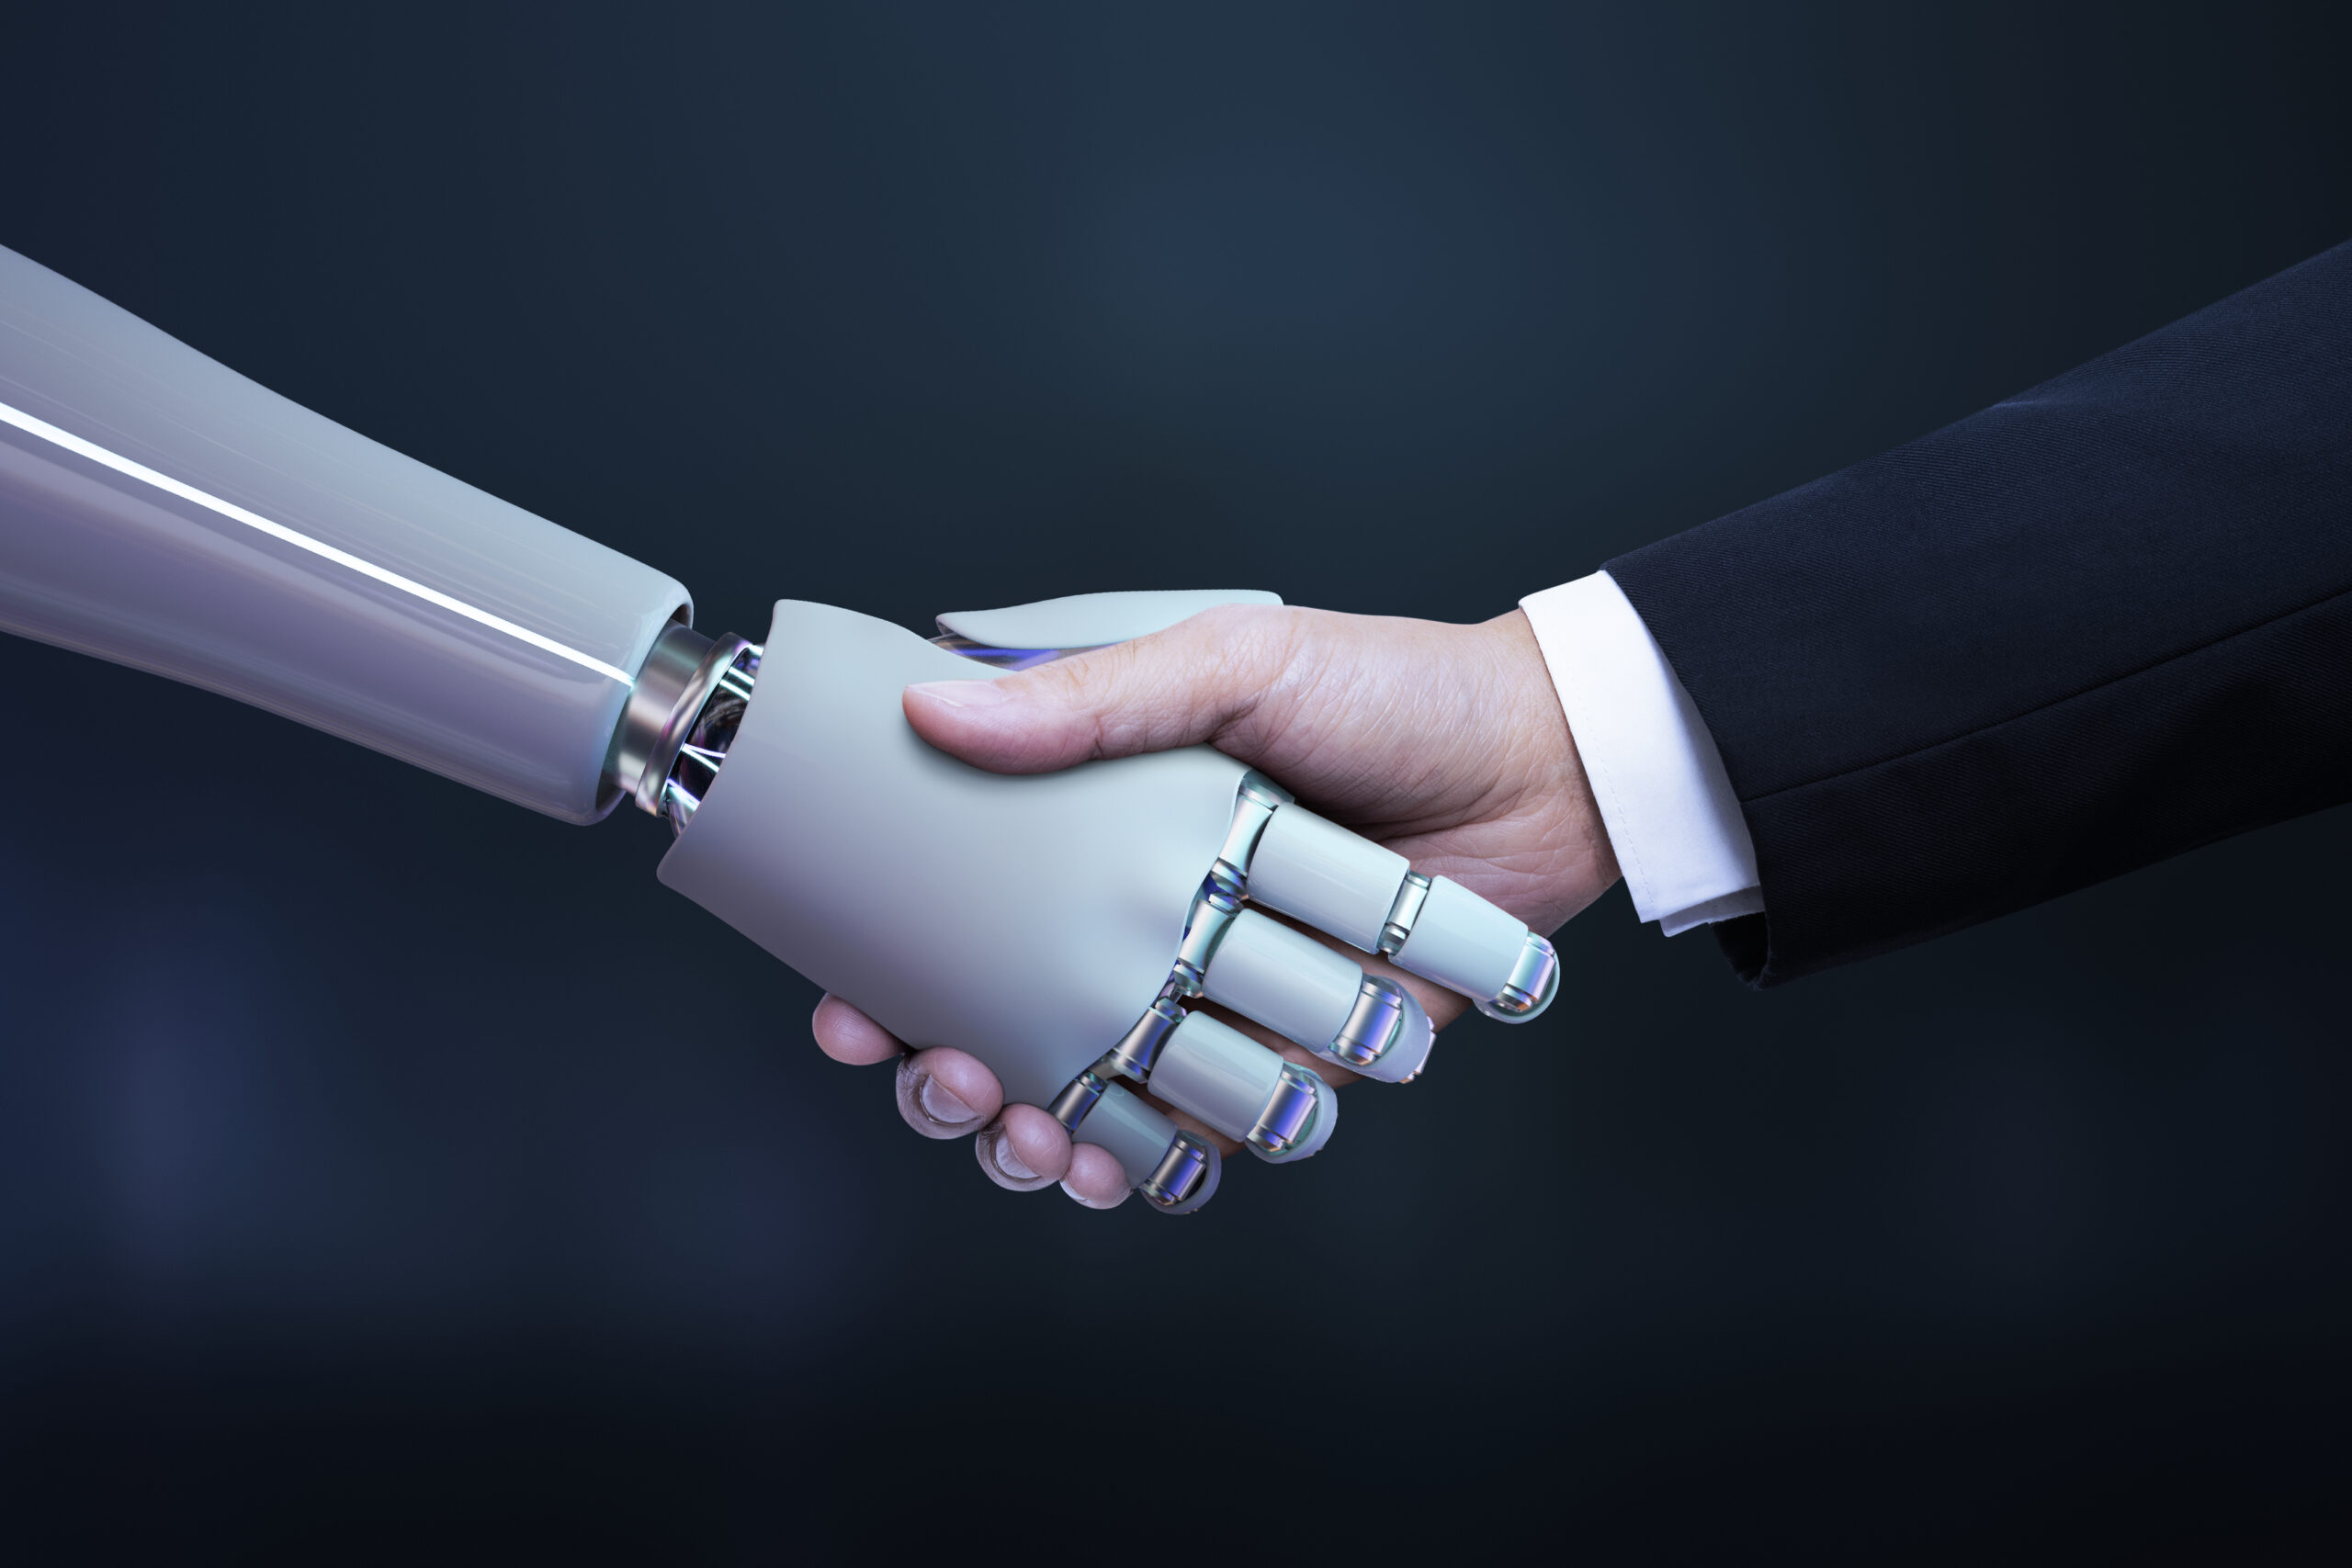 A robotic hand shaking hands with a human hand, symbolizing the intersection of AI solutions and human interaction against a dark background.